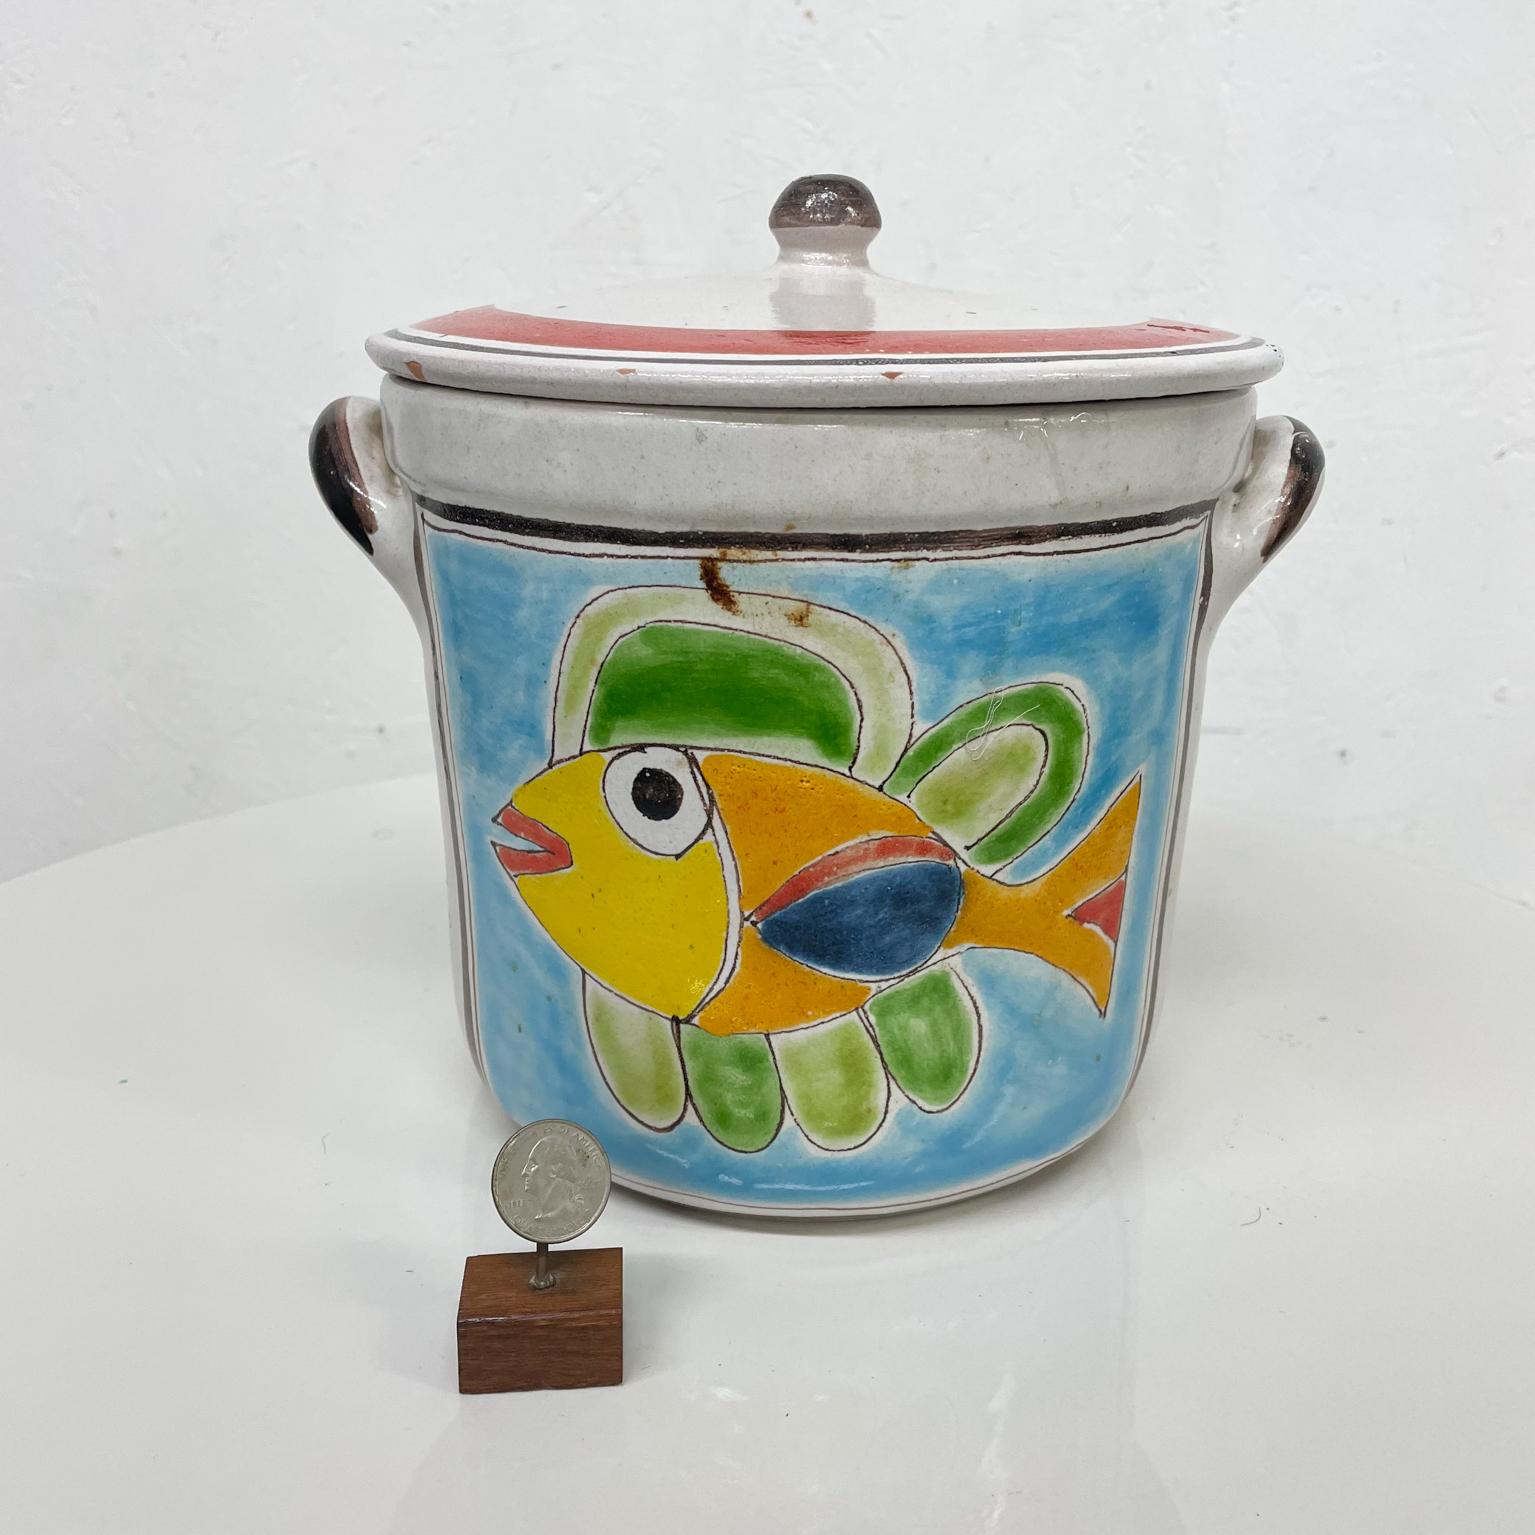 Italian Pottery
Giovanni DeSimone Pottery Palermo, Italy 1988
Jar with lid colorful fish design
Signed art
Measures: 9.75 width x 8.38 diameter x 9 height
Preowned unrestored good clean vintage condition. 
Please see images.


